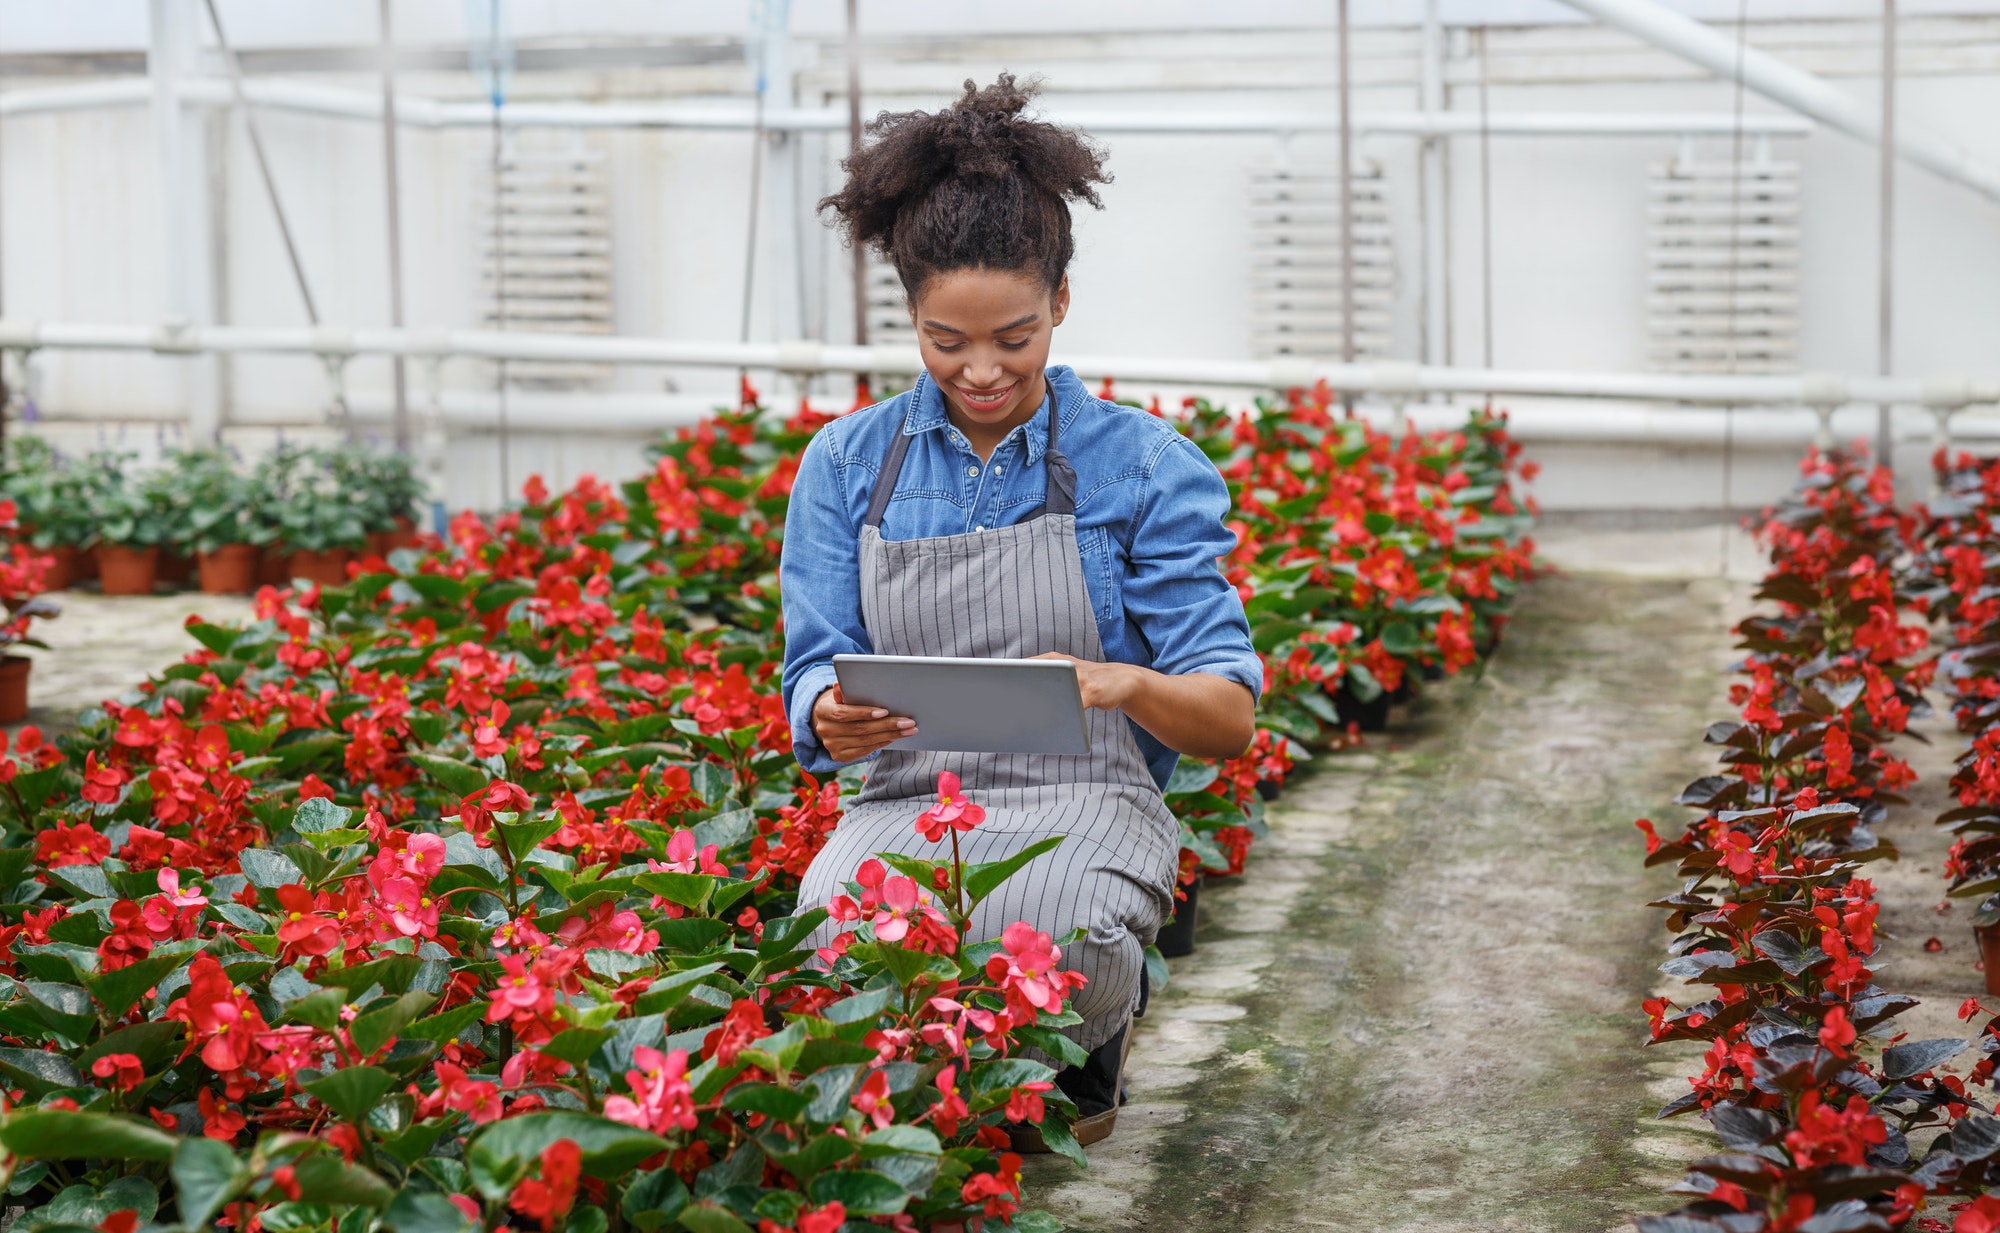 Smart greenhouse control. Woman worker inspects red flowers and enters data in tablet